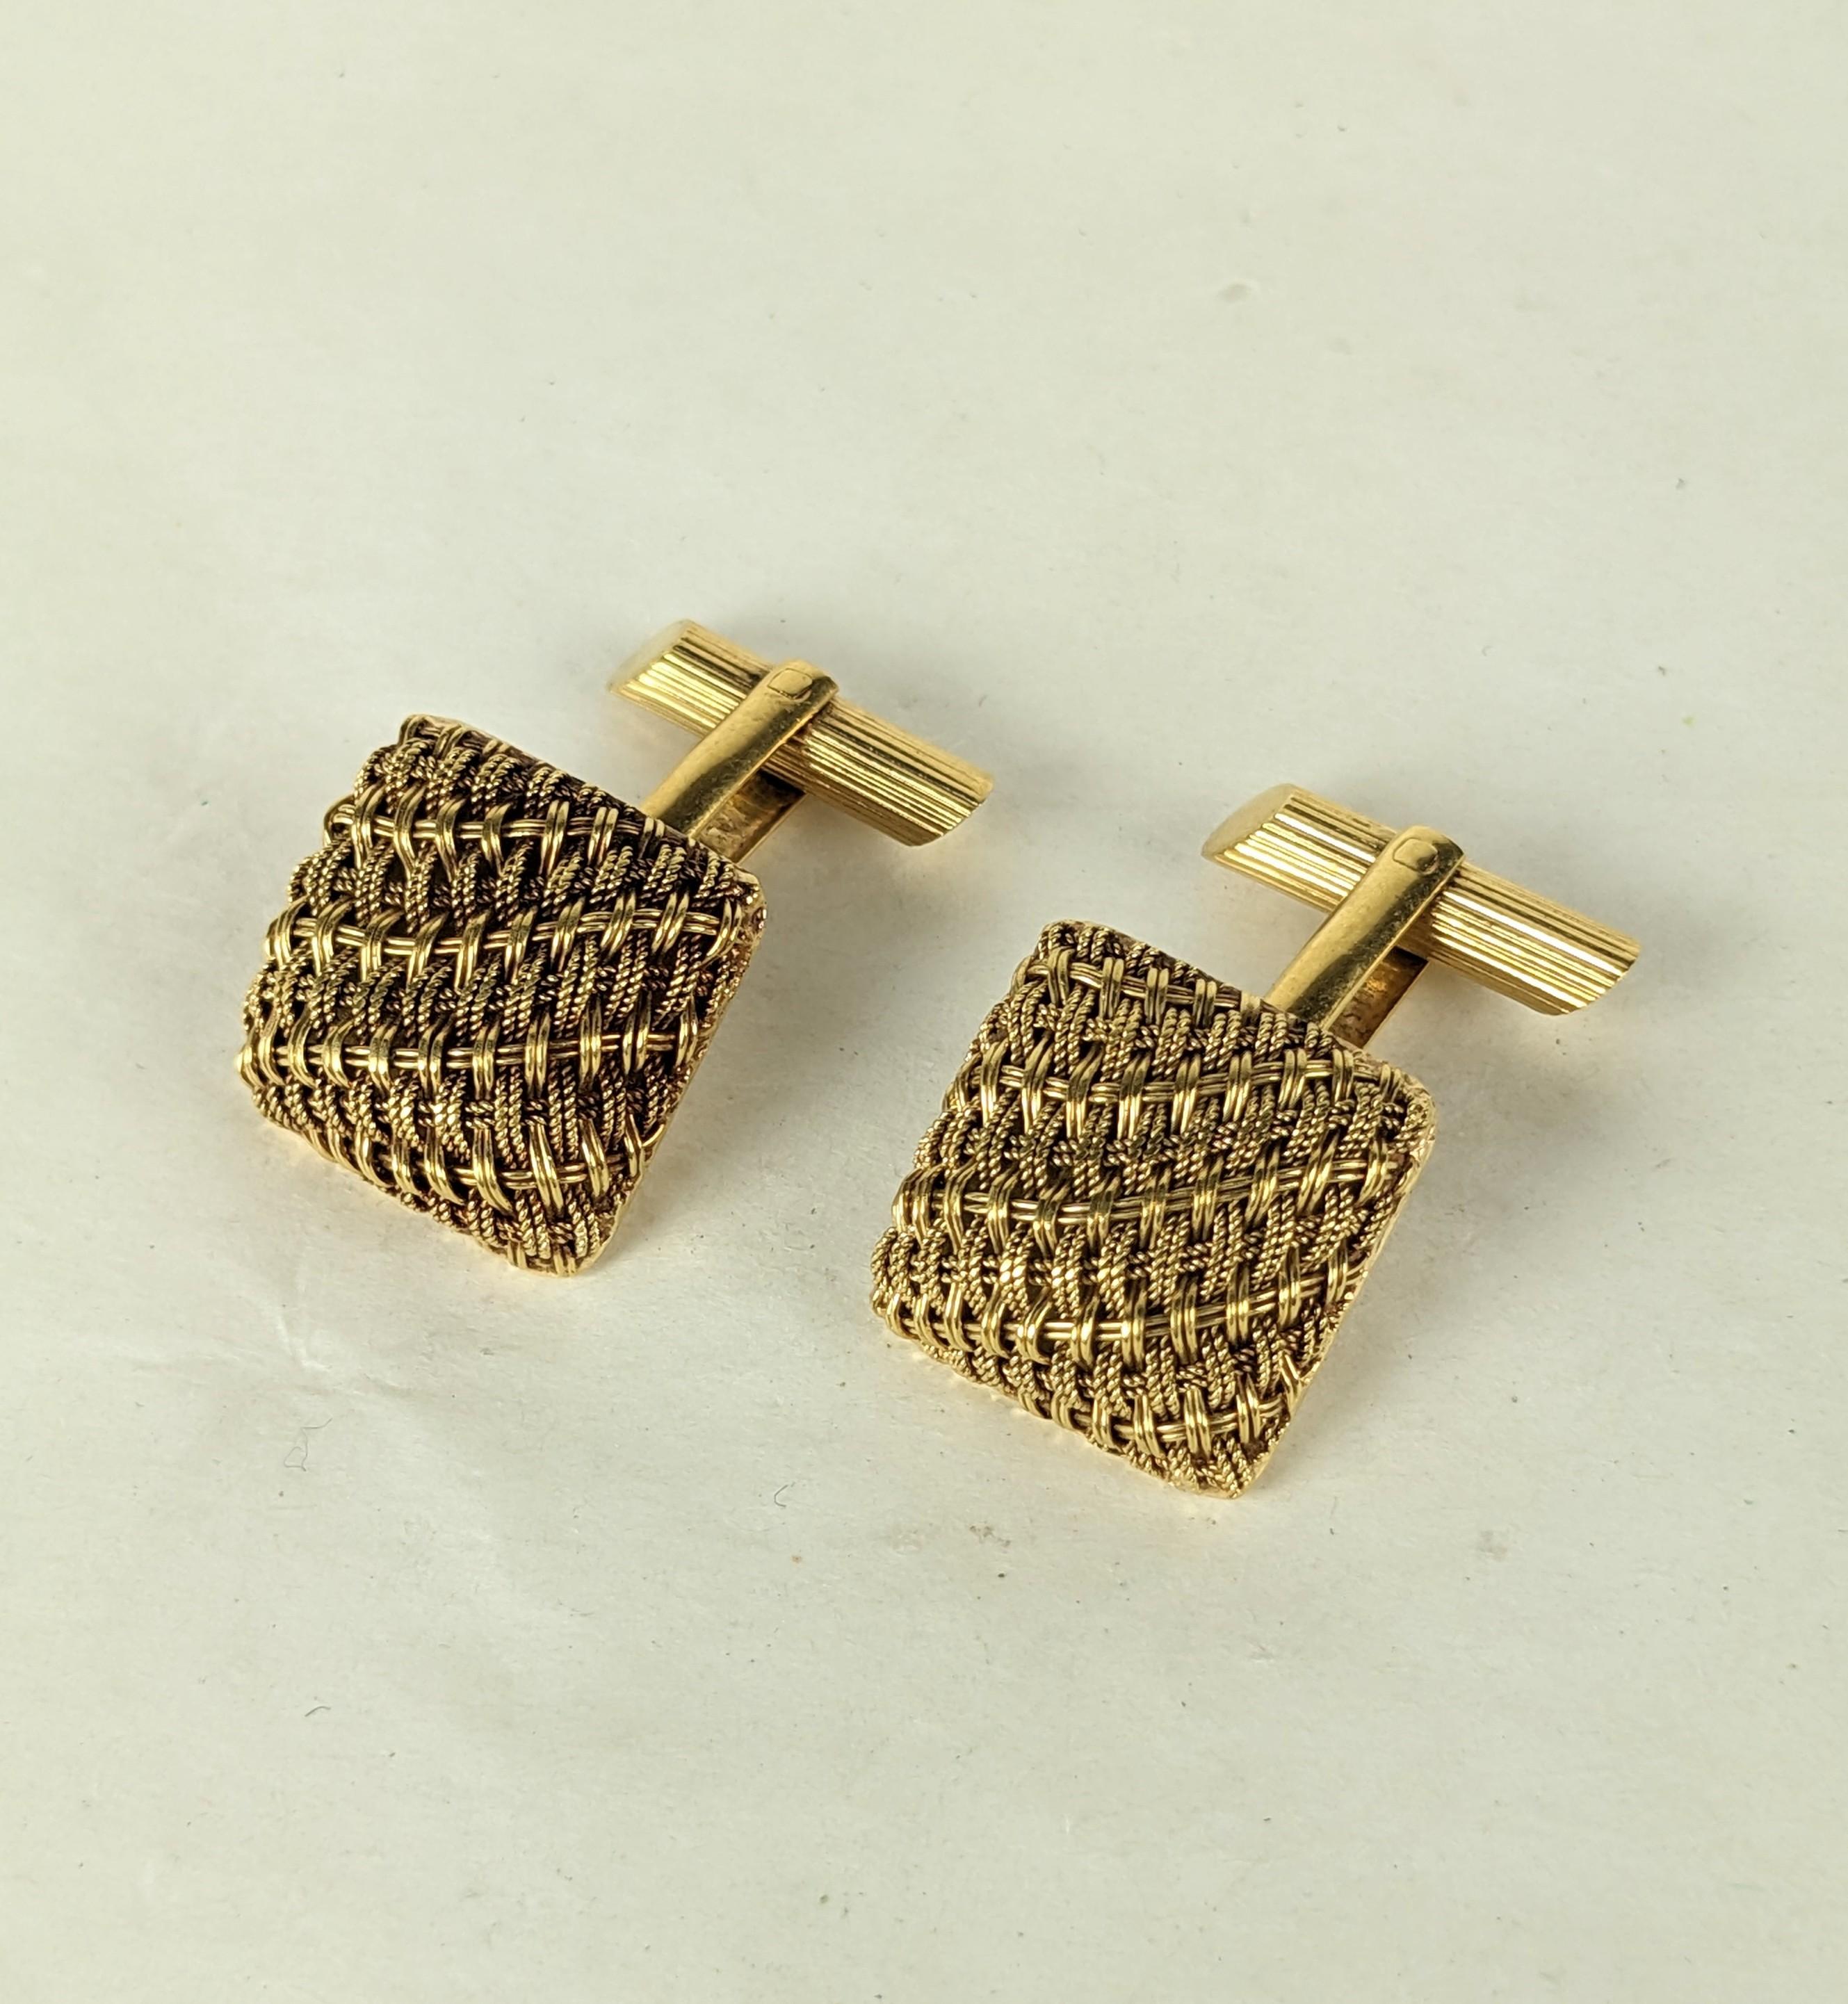 Woven 18K Textured Cufflinks from the 1970's. 18K gold wire is woven into a 